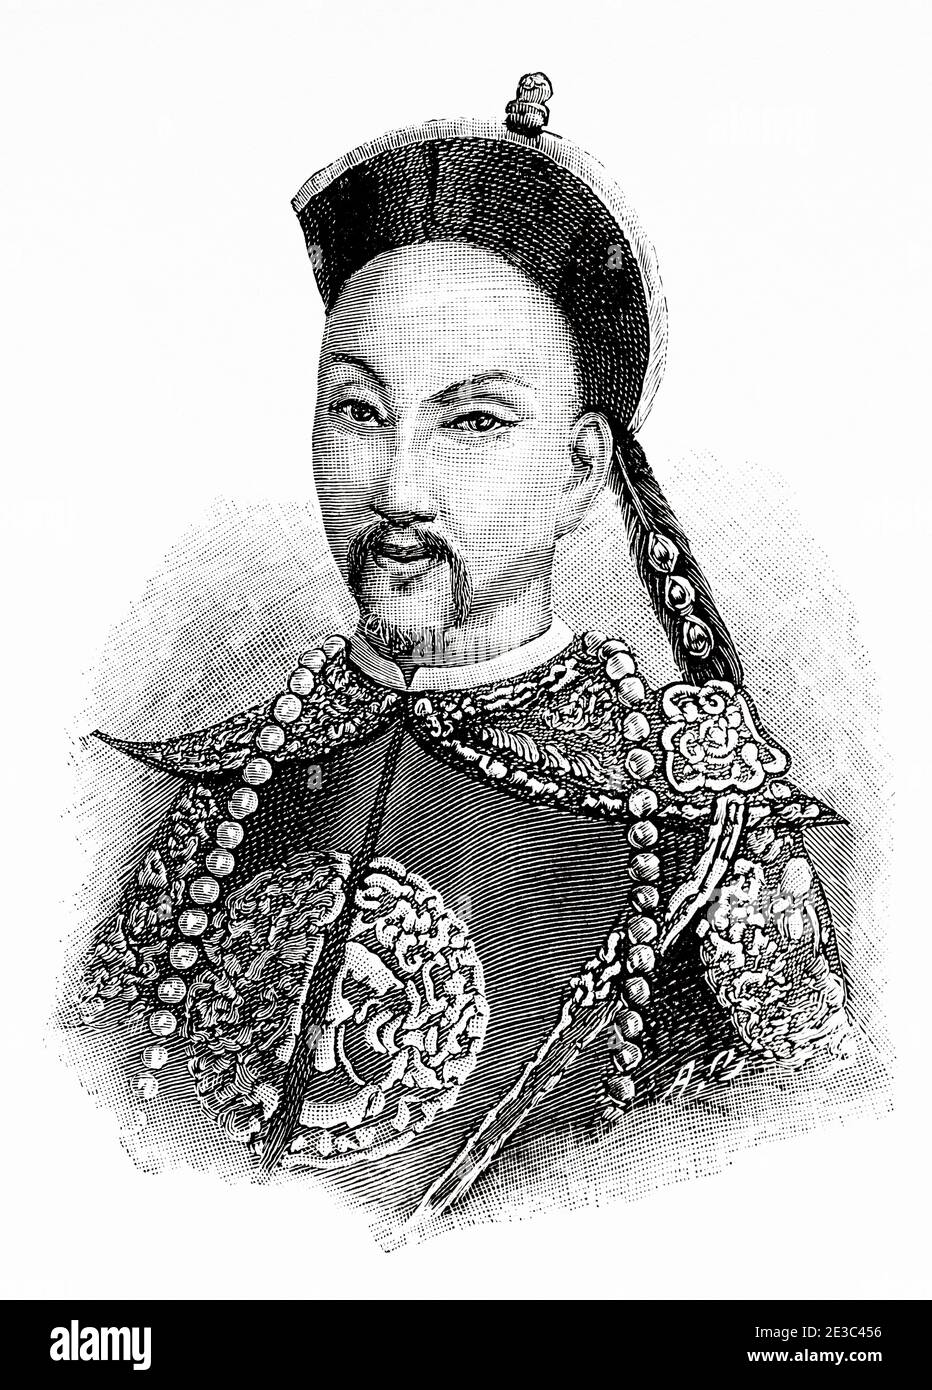 Portrait of Portrait of Guangxu Emperor (1871-1908) eleventh emperor of the Qing dynasty, and the ninth Qing emperor to rule over China. Old XIX century engraved illustration from La Ilustracion Española y Americana 1894 Stock Photo